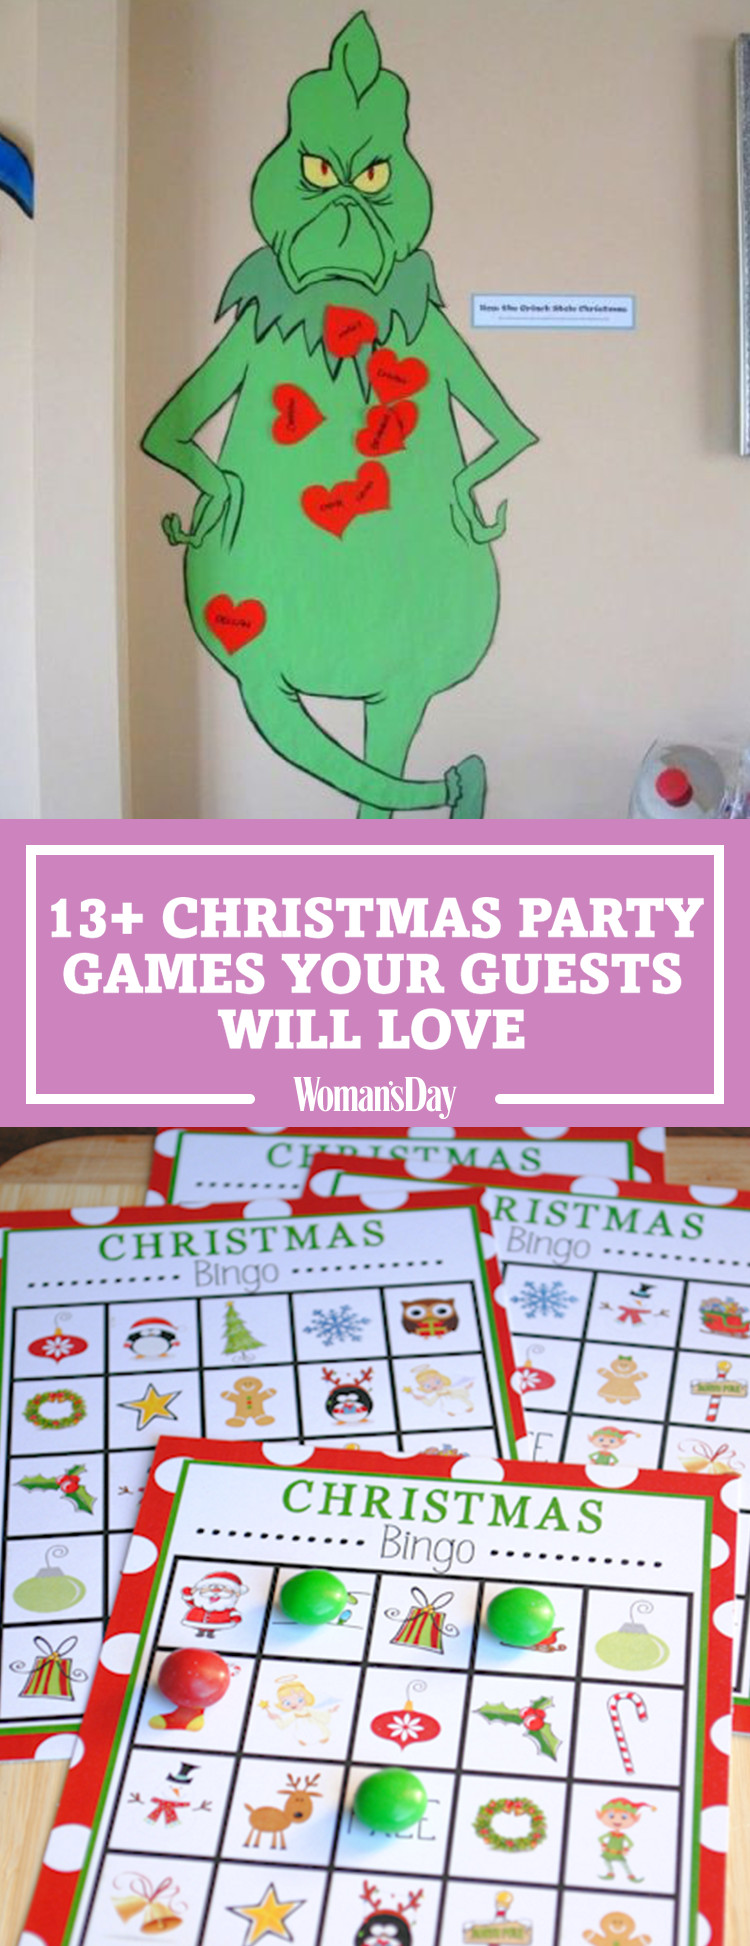 Kid Christmas Party Game Ideas
 17 Fun Christmas Party Games for Kids DIY Holiday Party